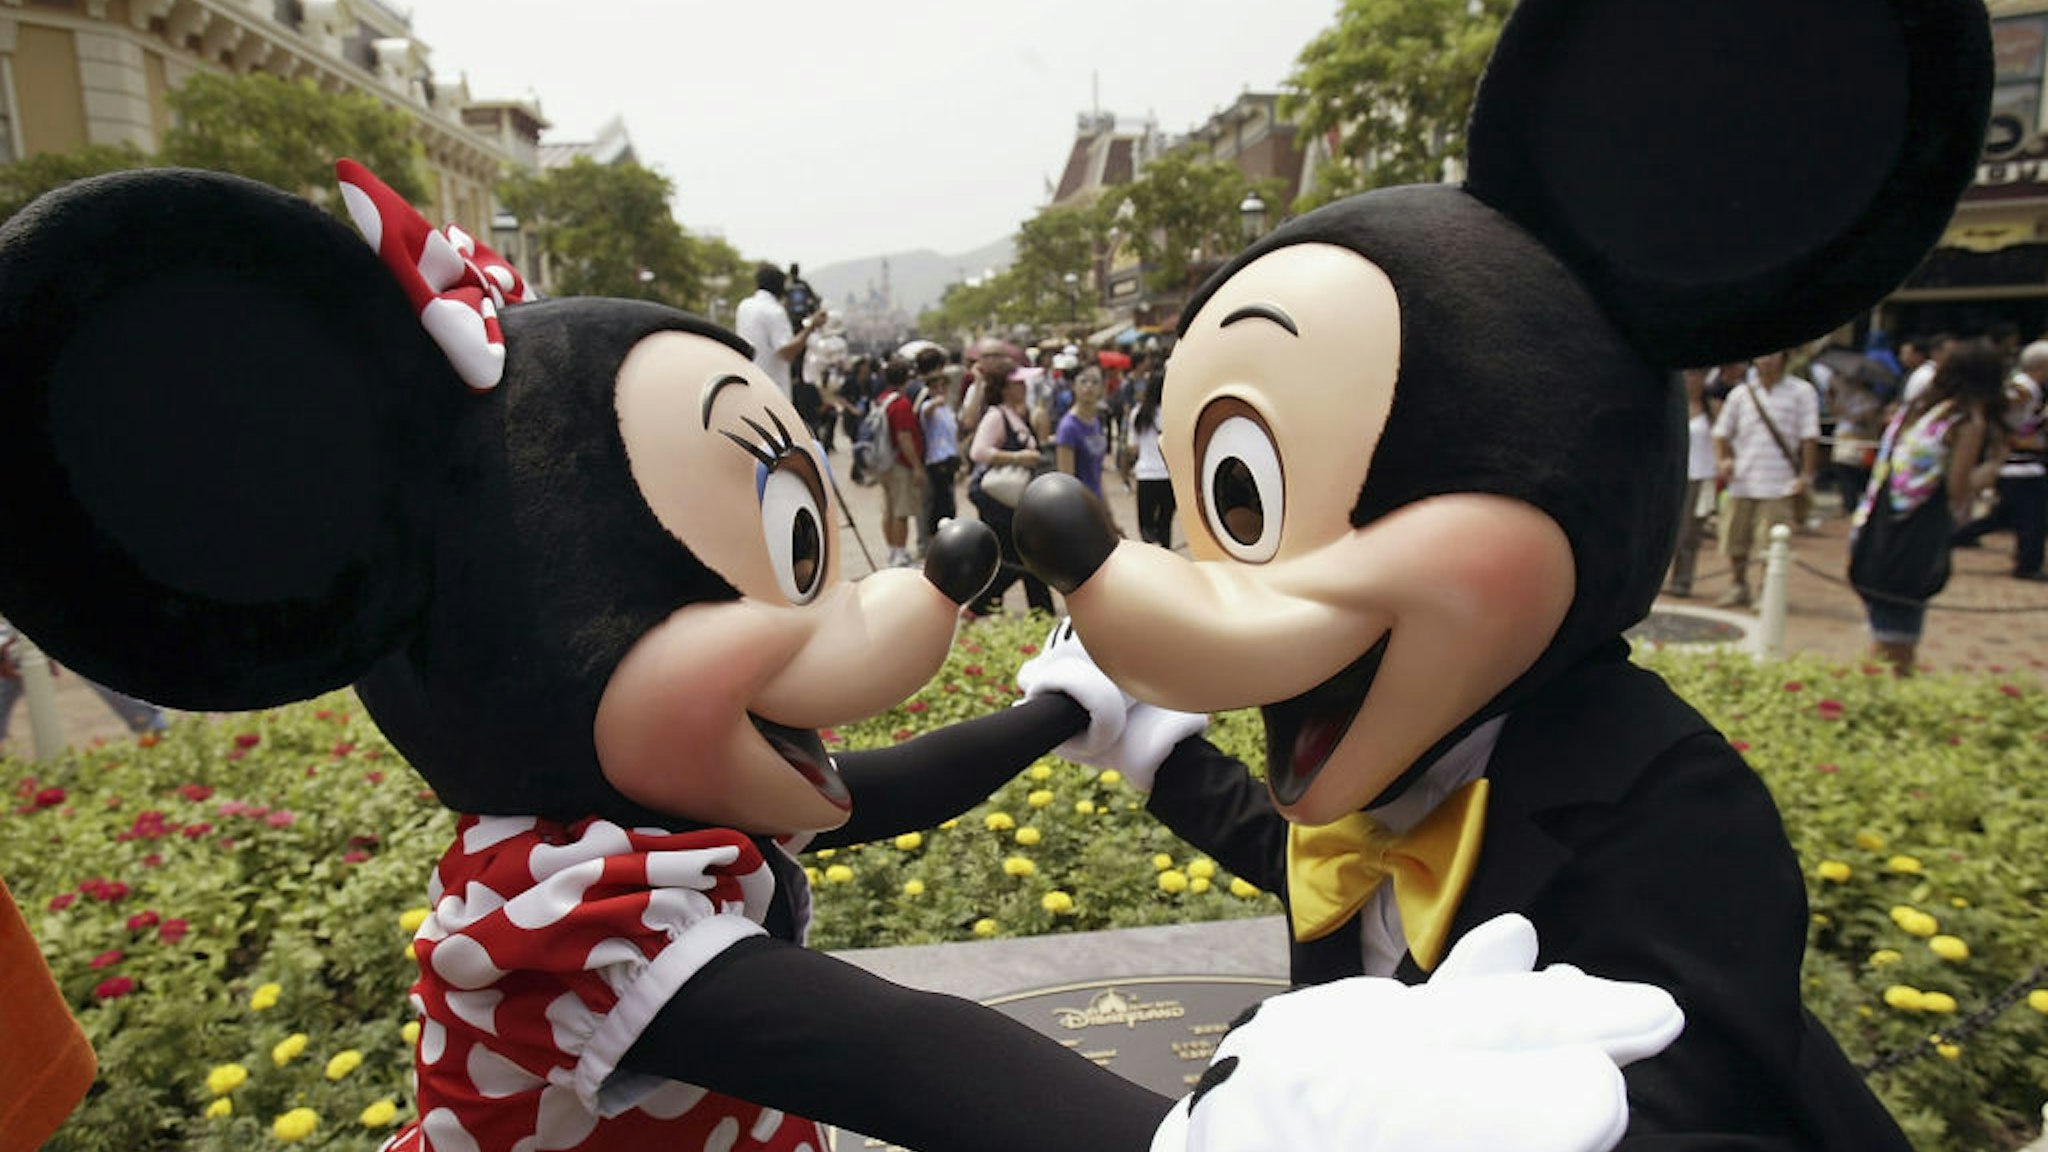 HONG KONG, CHINA - SEPTEMBER 12: Disney characters Mickey and Minnie Mouse welcome visitors during the grand opening day of Hong Kong Disneyland September 12, 2005 in Hong Kong (Photo by MN Chan/Getty Images)